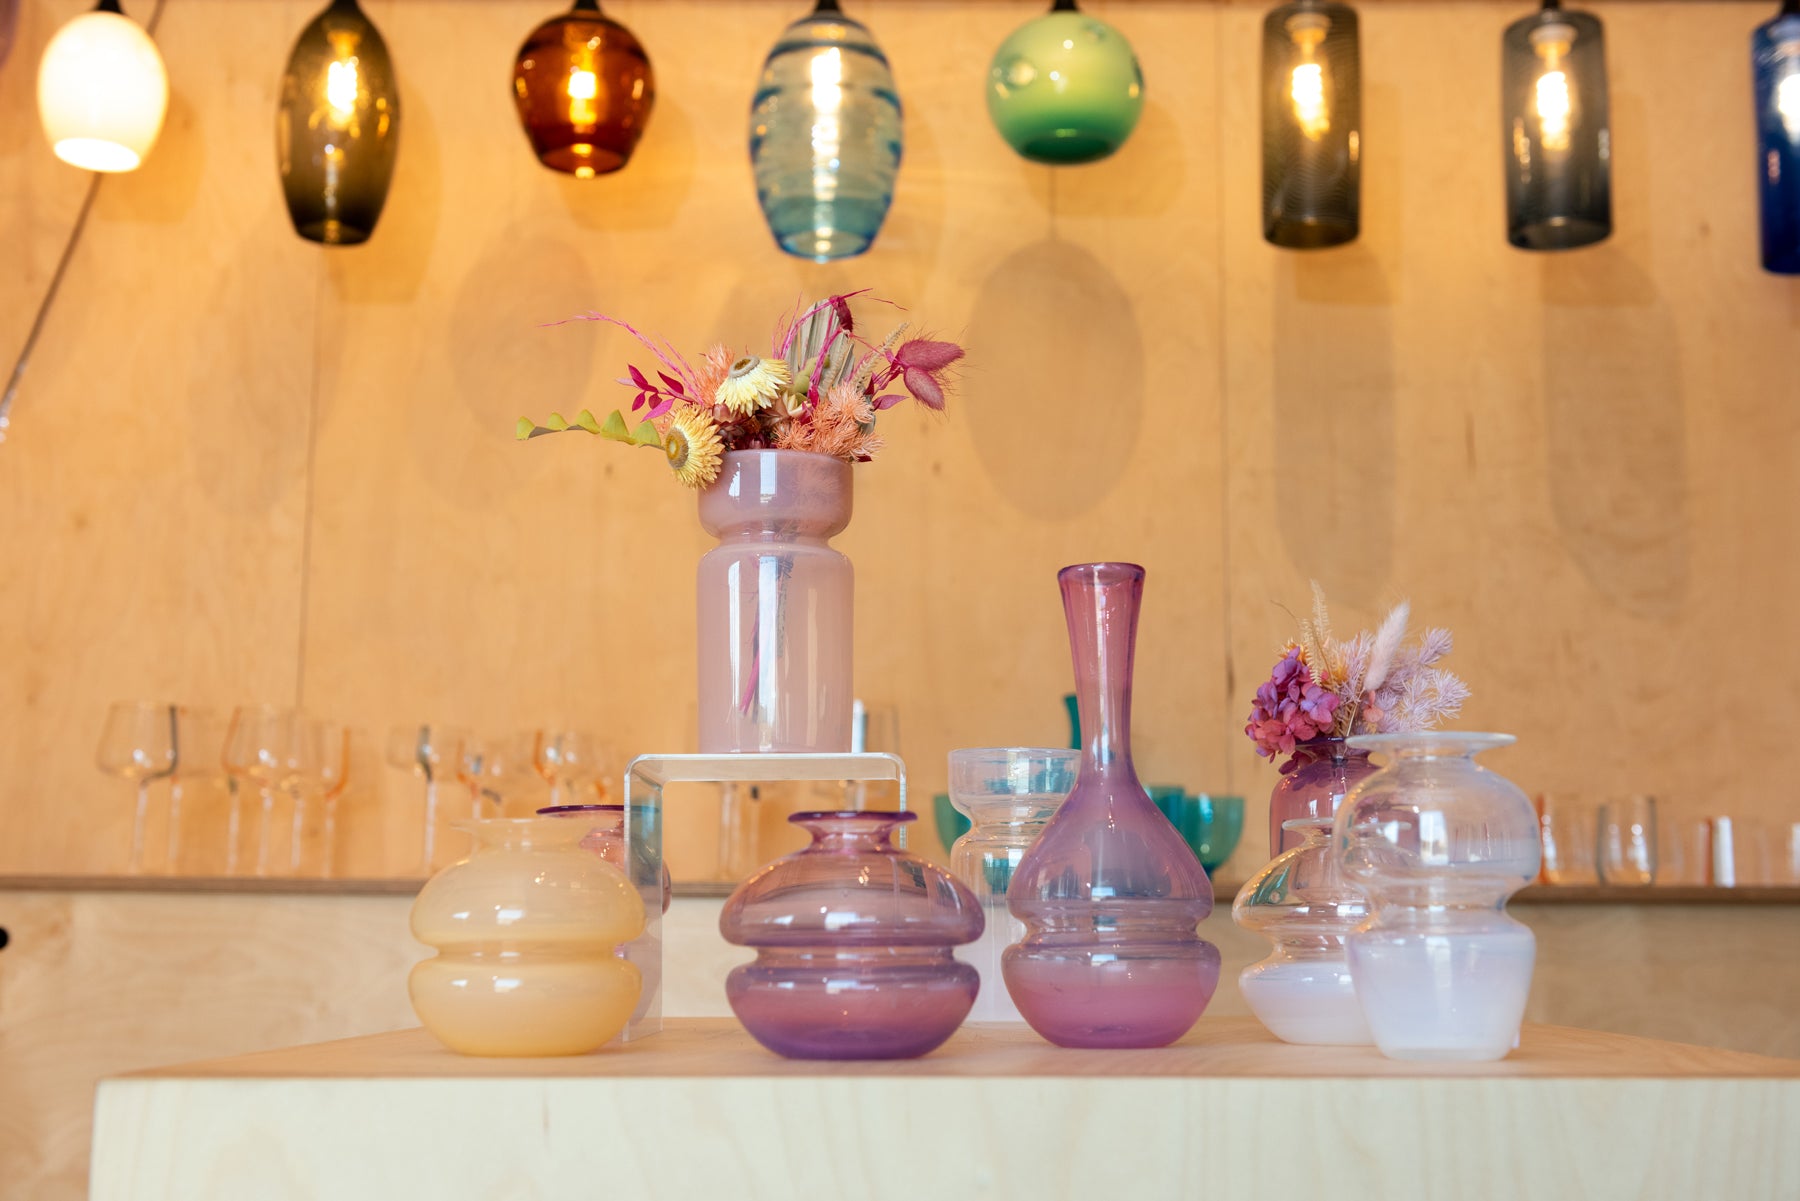 A view inside the gallery of Small Batch Glass where several pink shade bud vases sit on a pedestal in front of hanging lights. Image by Loam